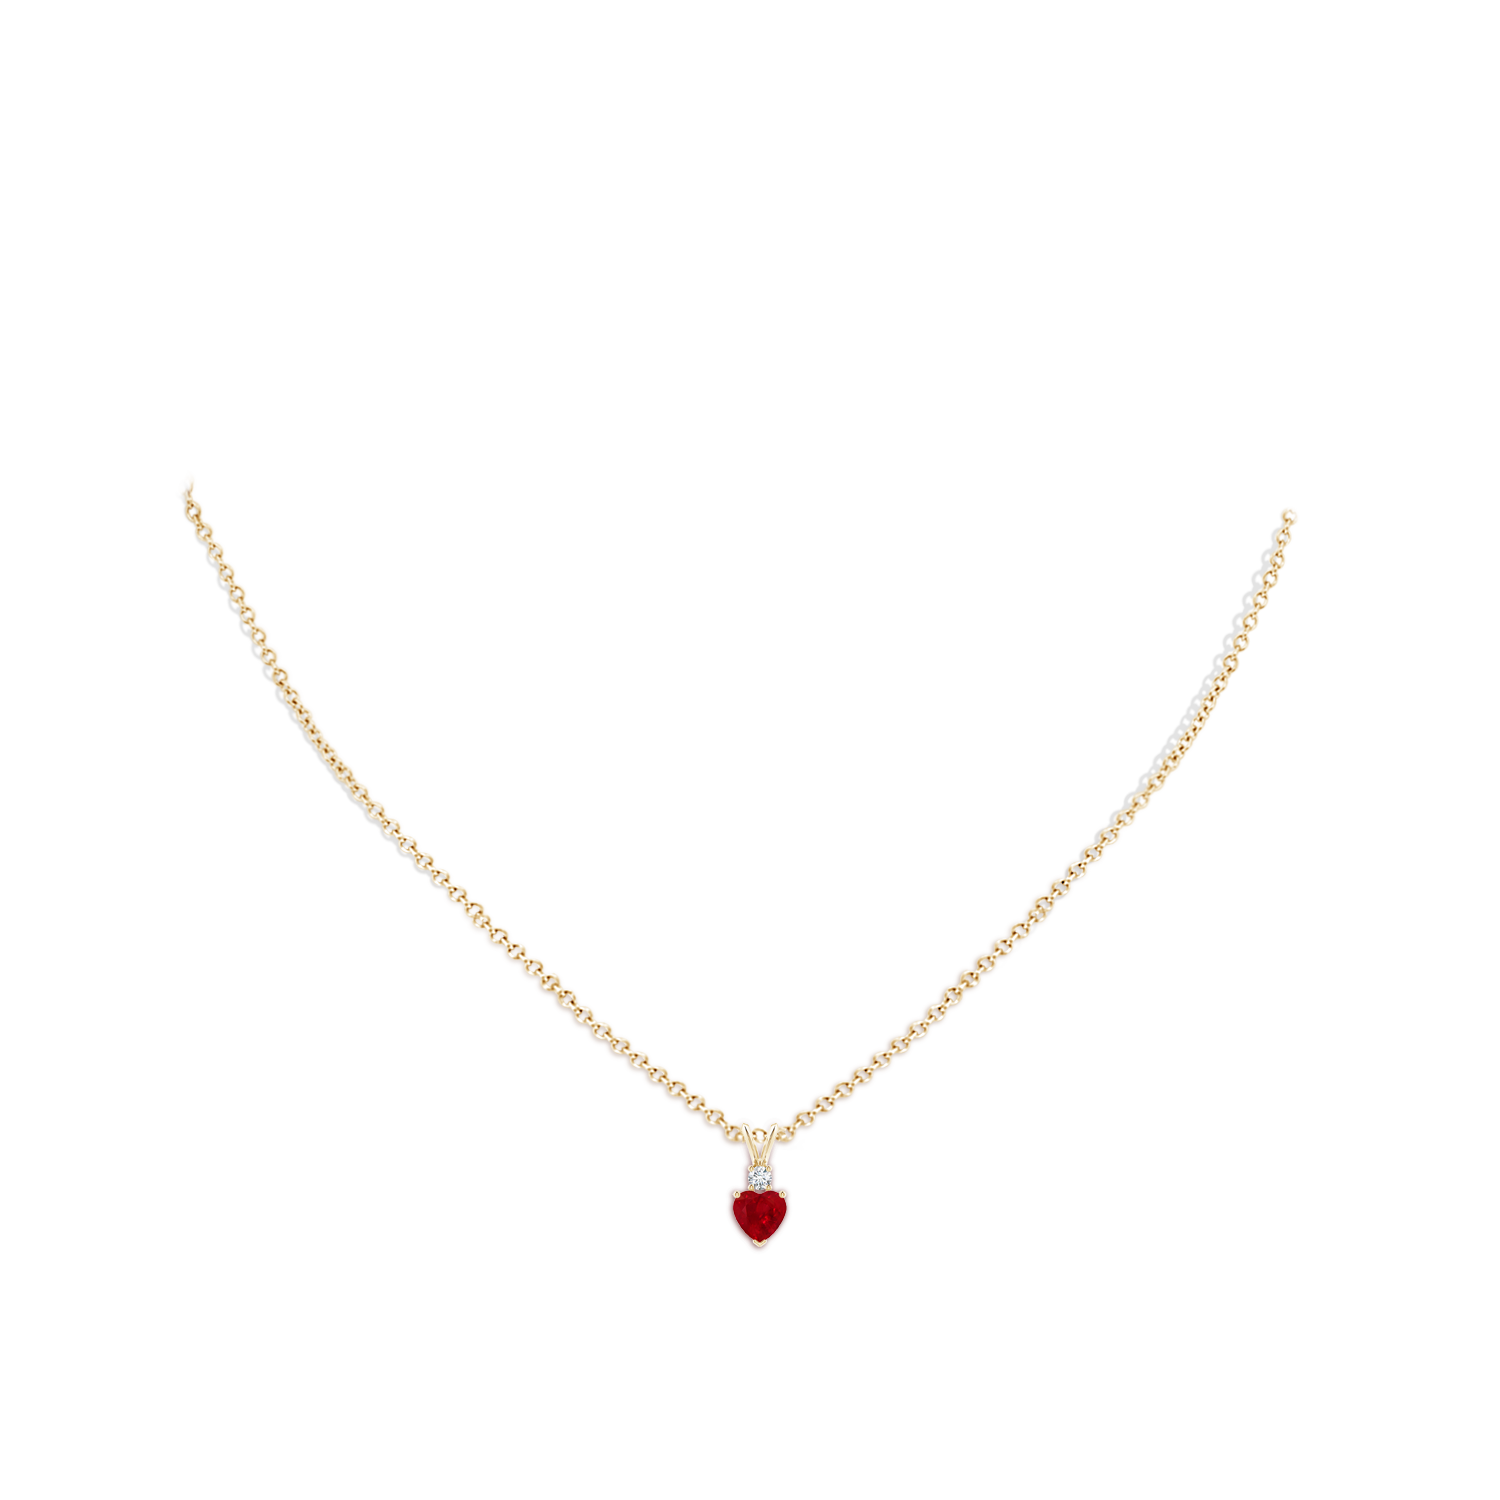 AAA - Ruby / 0.59 CT / 14 KT Yellow Gold